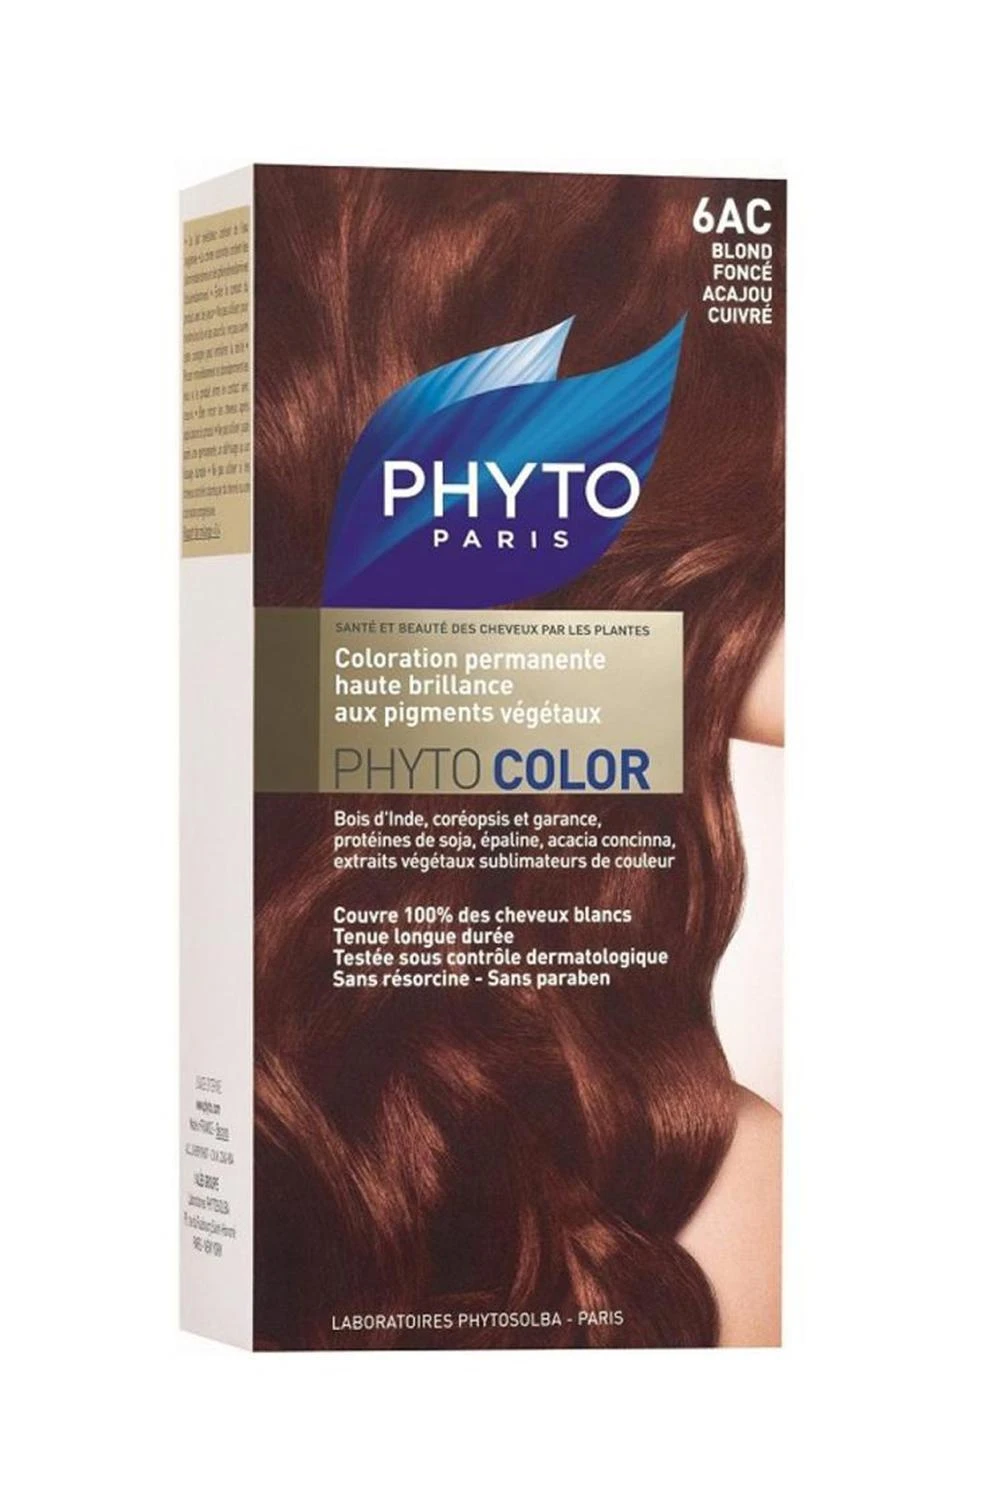 Phyto Permanent Hair Color Treatment 6AC Blond Fonce Acajou Cuivre Fast  Shipping with Fedex|Hair Color| - AliExpress